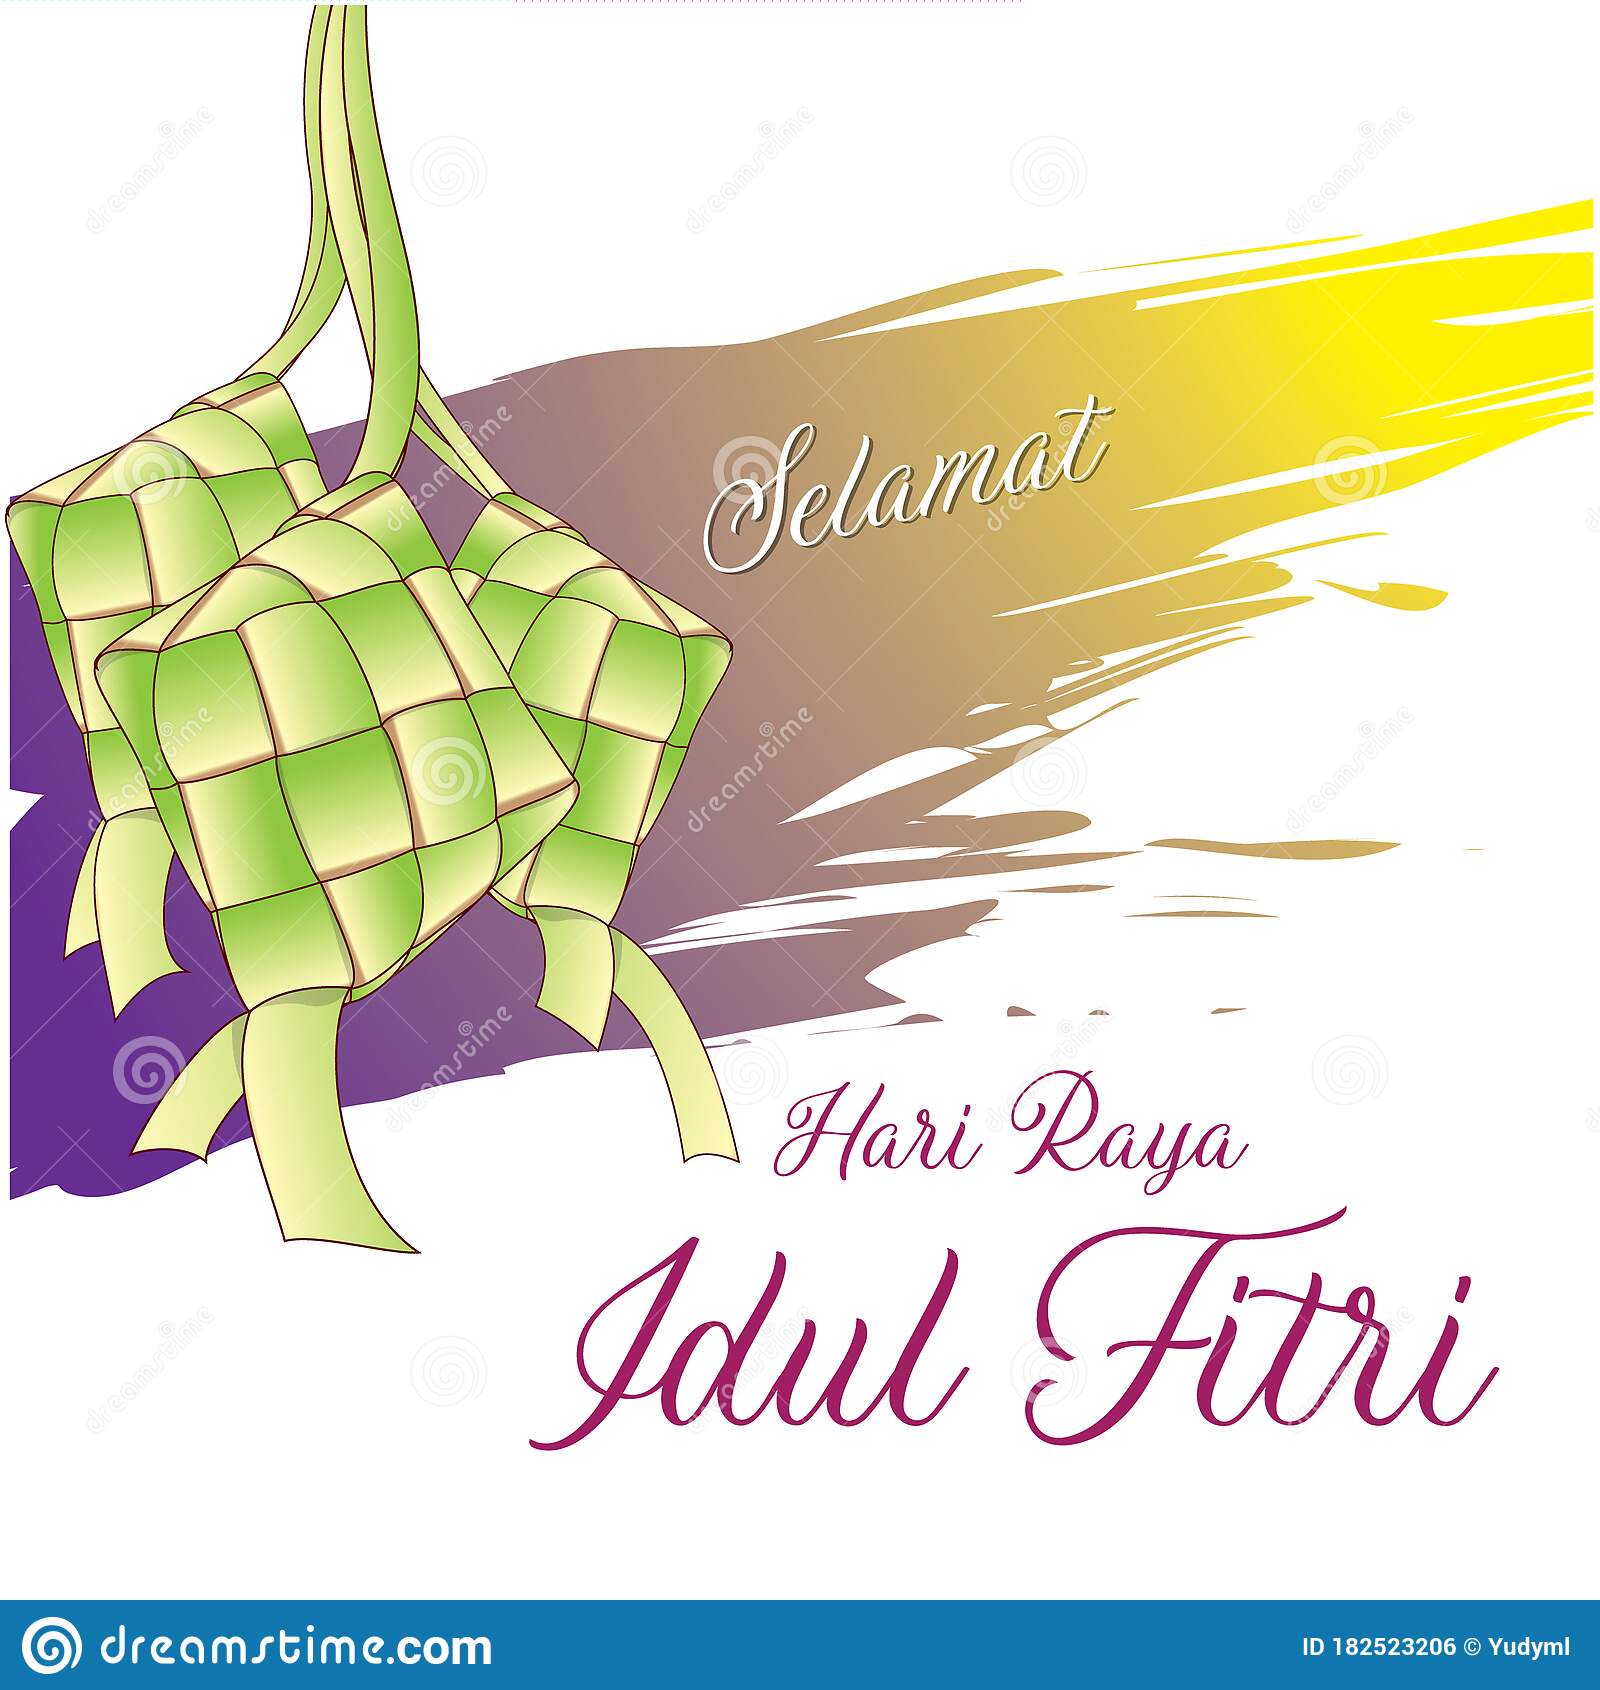 Detail Idul Fitri Background Vector Nomer 27